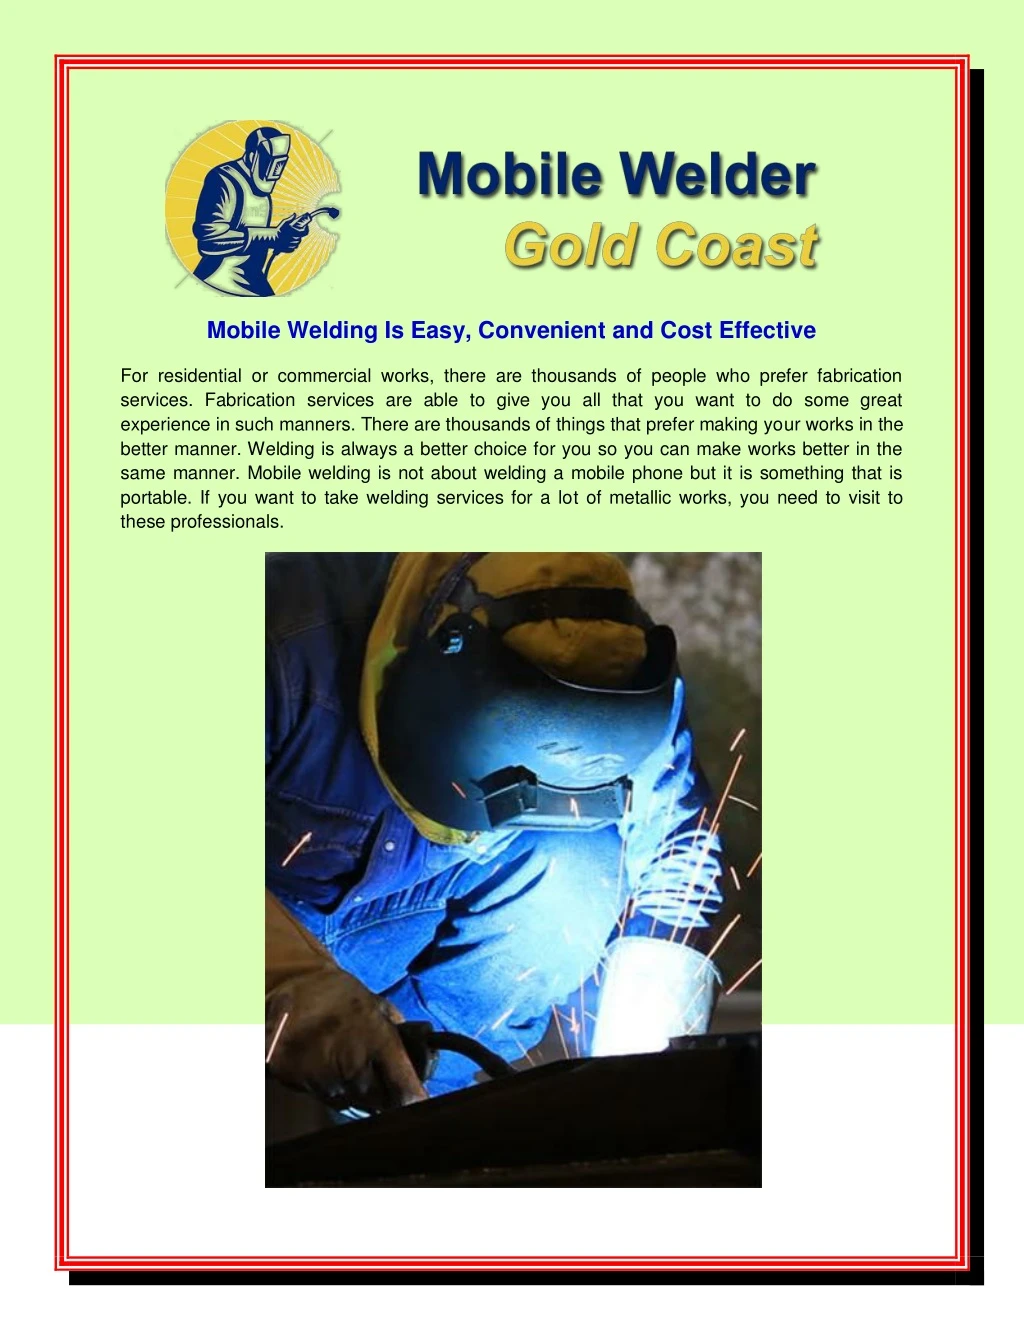 mobile welding is easy convenient and cost